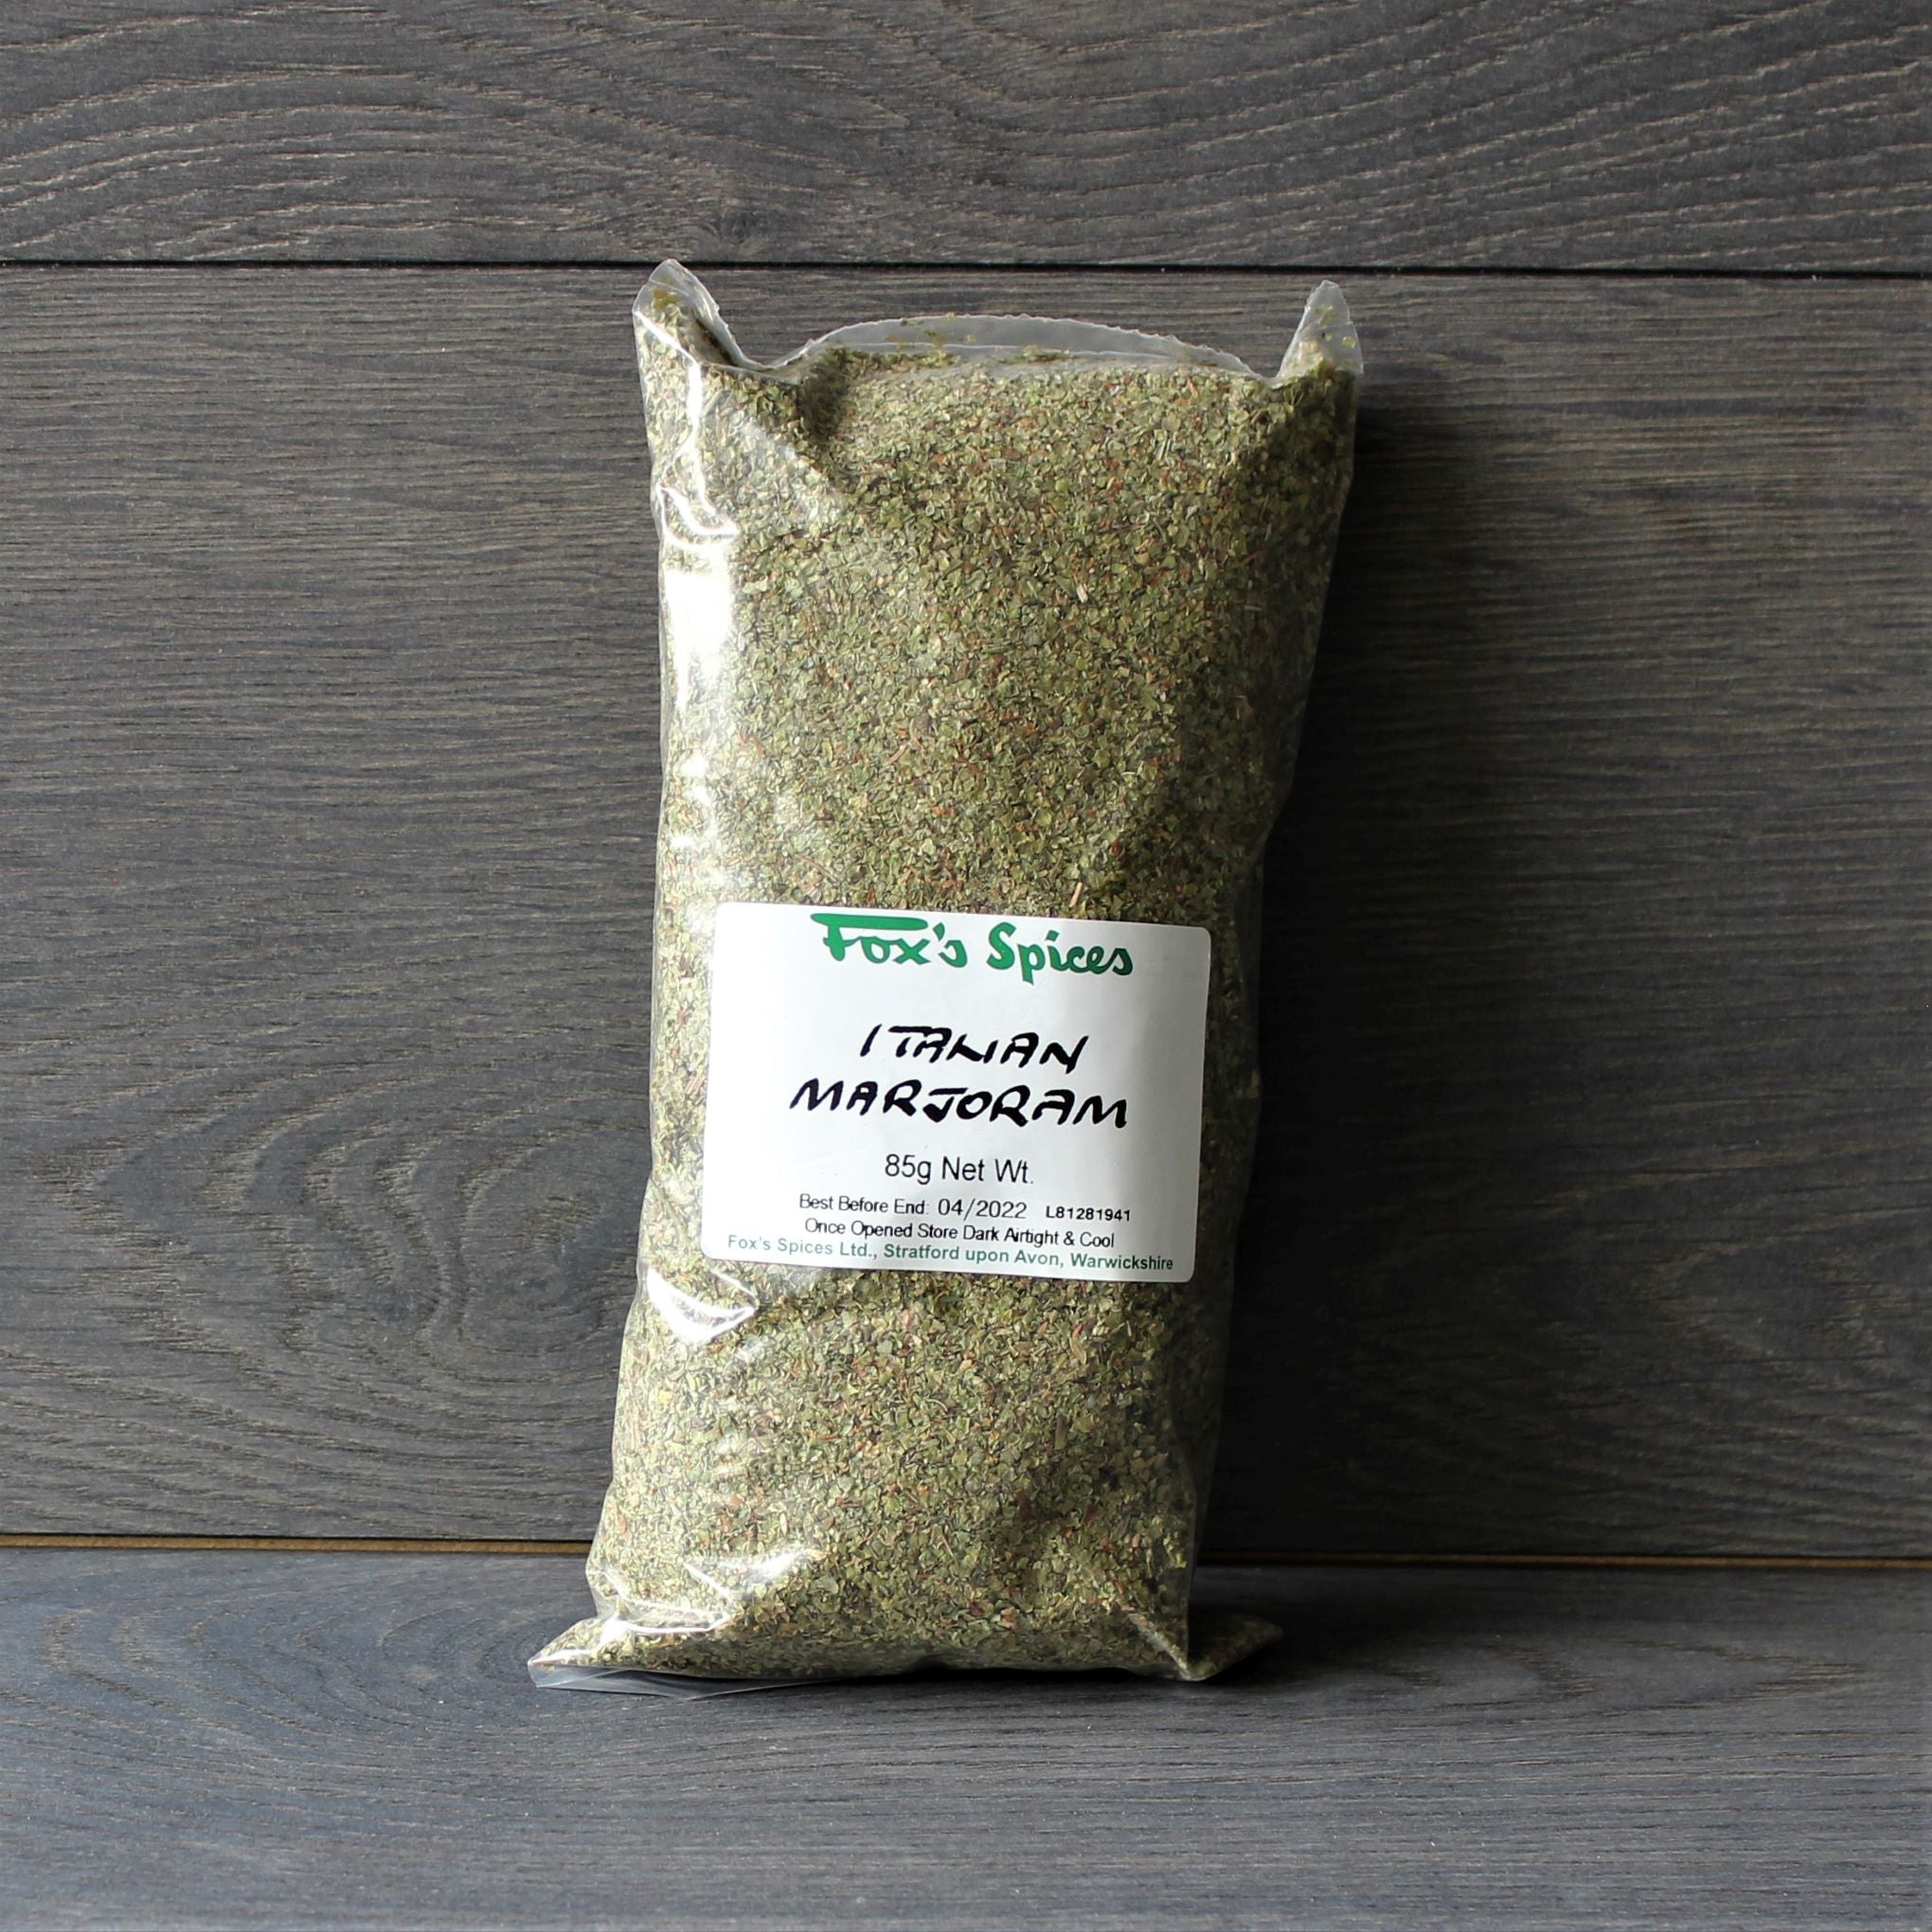 A 85g bag of Italian Marjoram by Fox's Spices